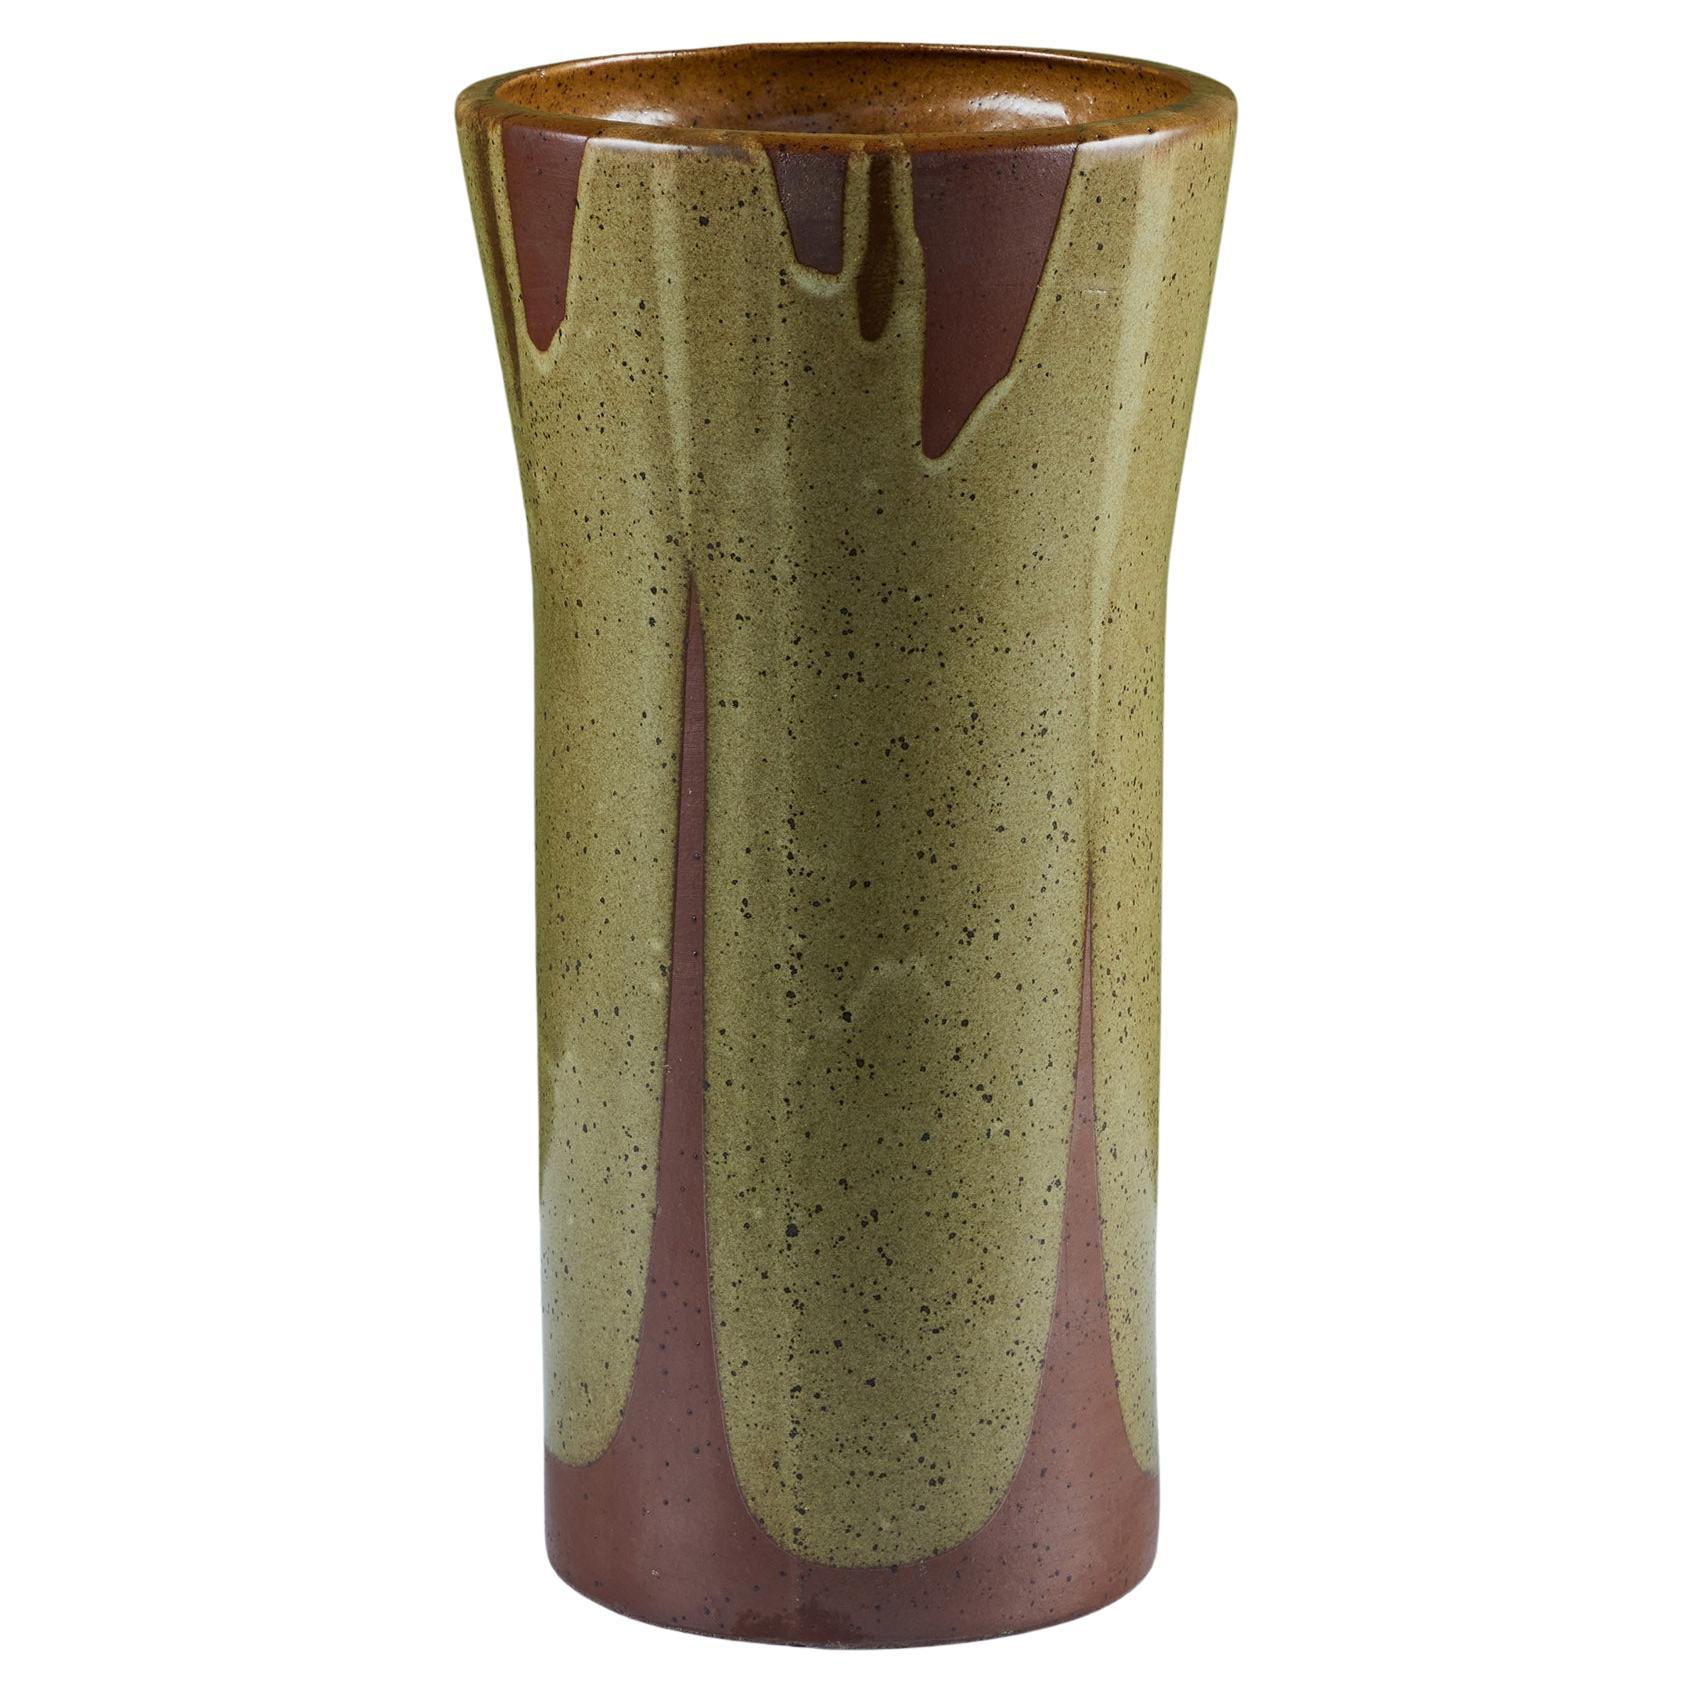 David Cressey Pro/Artisan Flame-Glaze Urn for Architectural Pottery (Urne pour poterie architecturale)